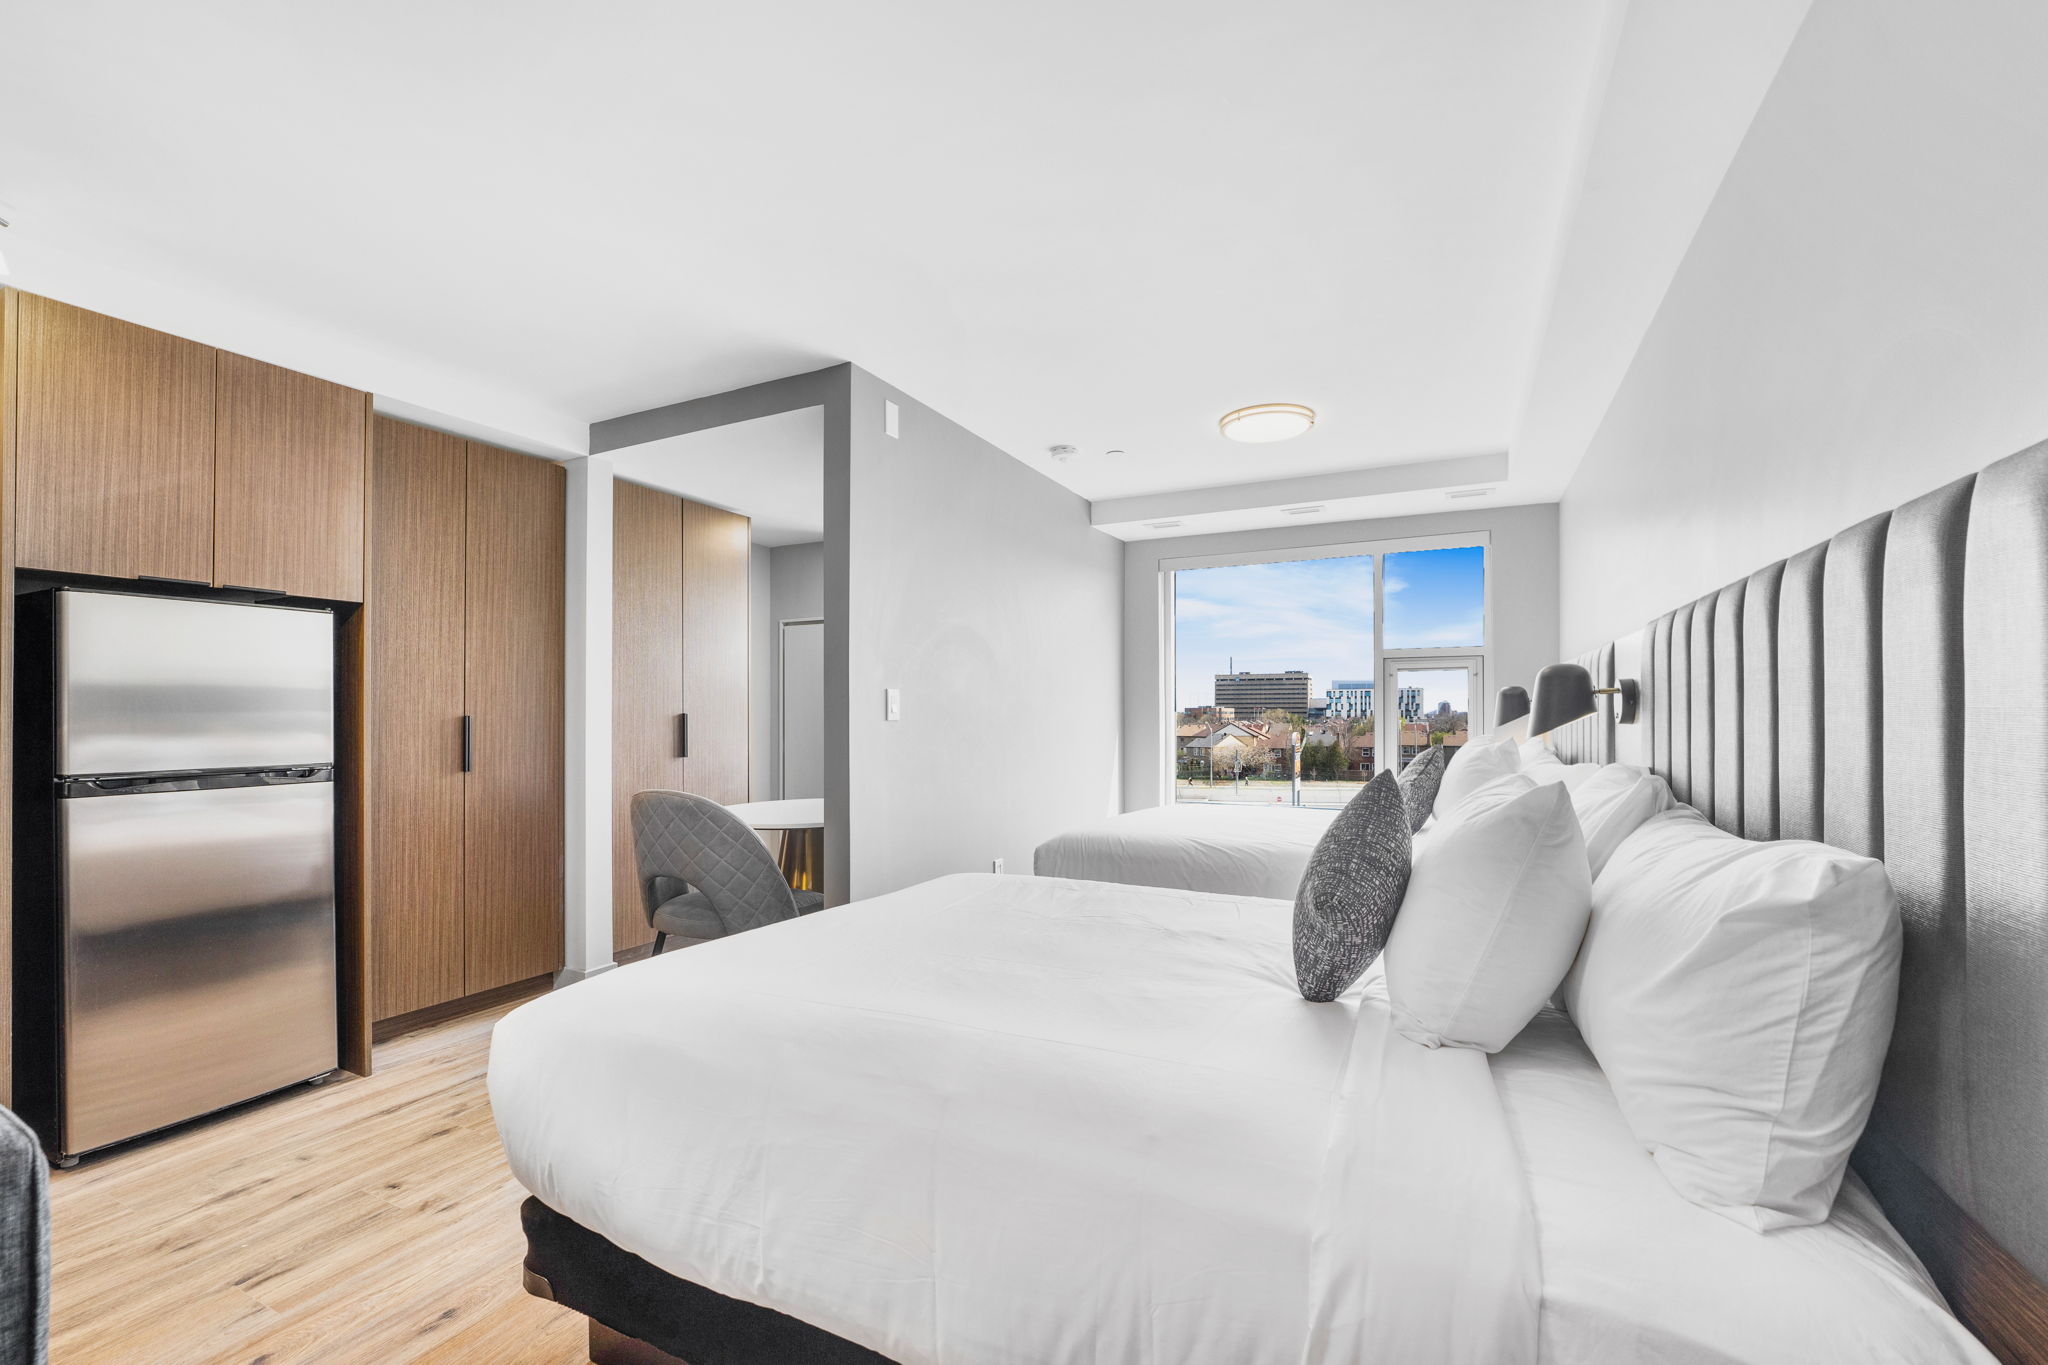 2 Bedroom Queen Suite with Sofa Bed |Washer & Dryer in All Suites| Sky Residences Near Toronto Airport